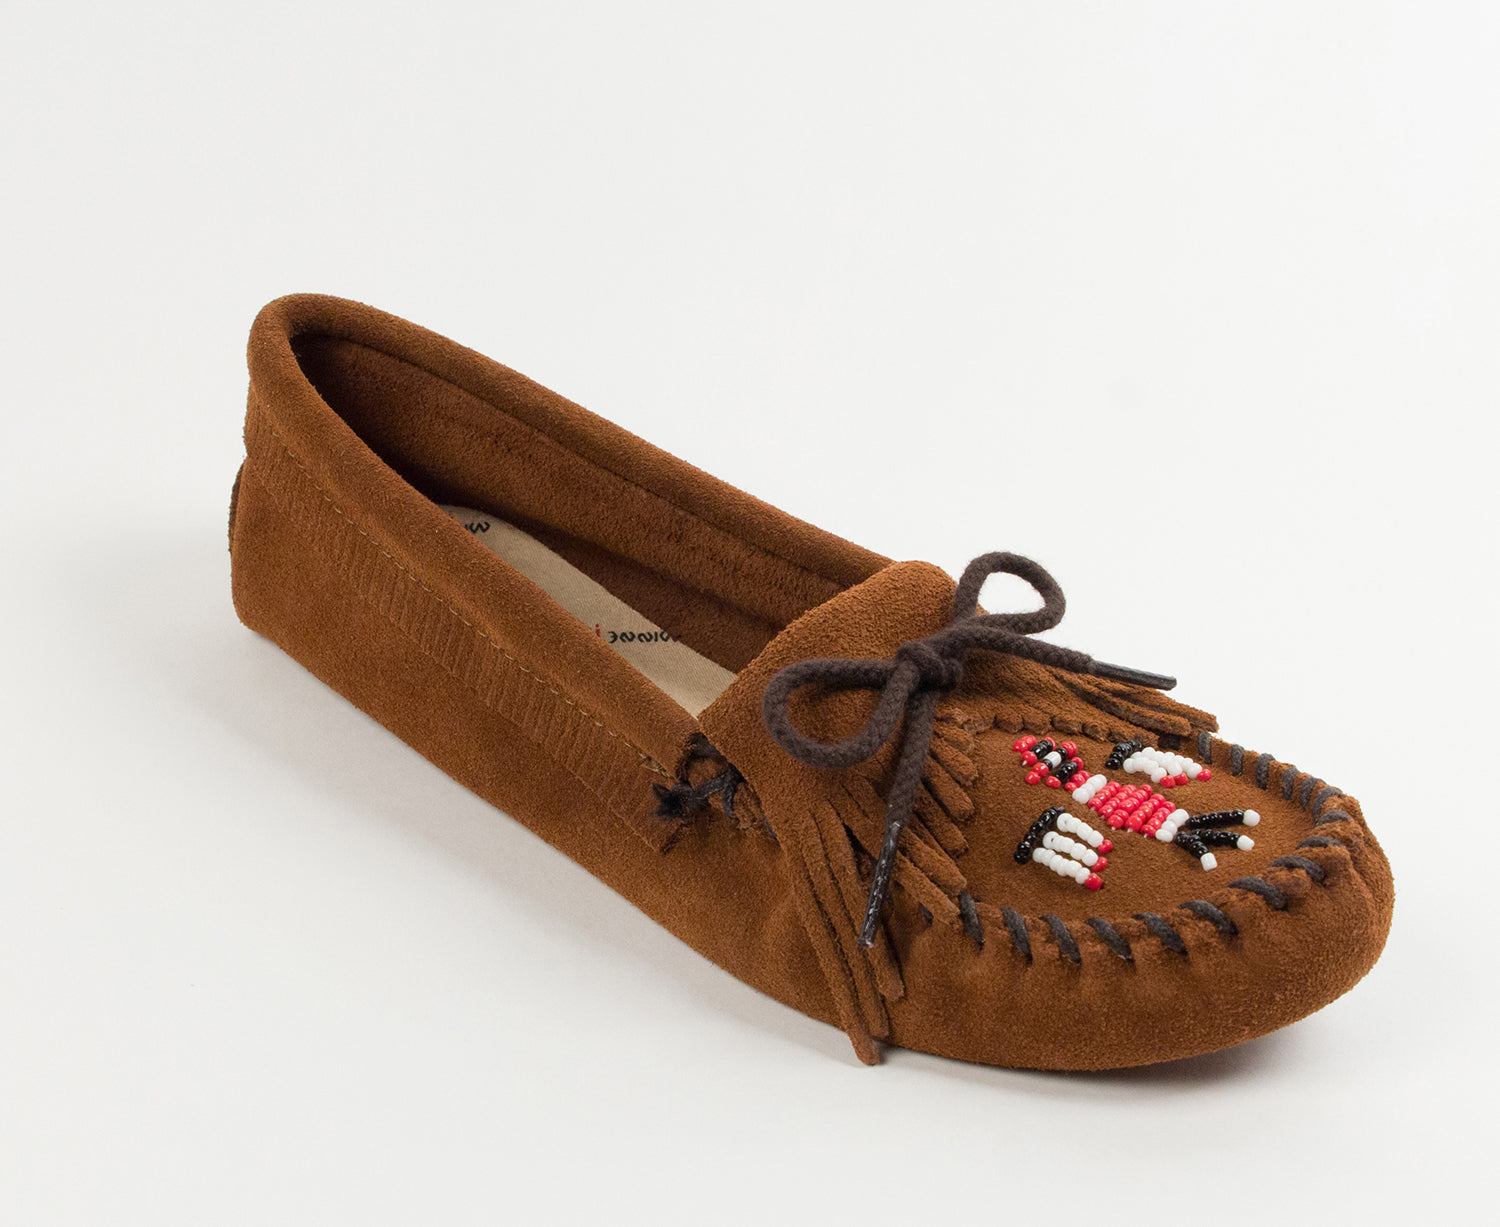 Thunderbird Softsole Moccasin in Brown from 3/4 Angle View